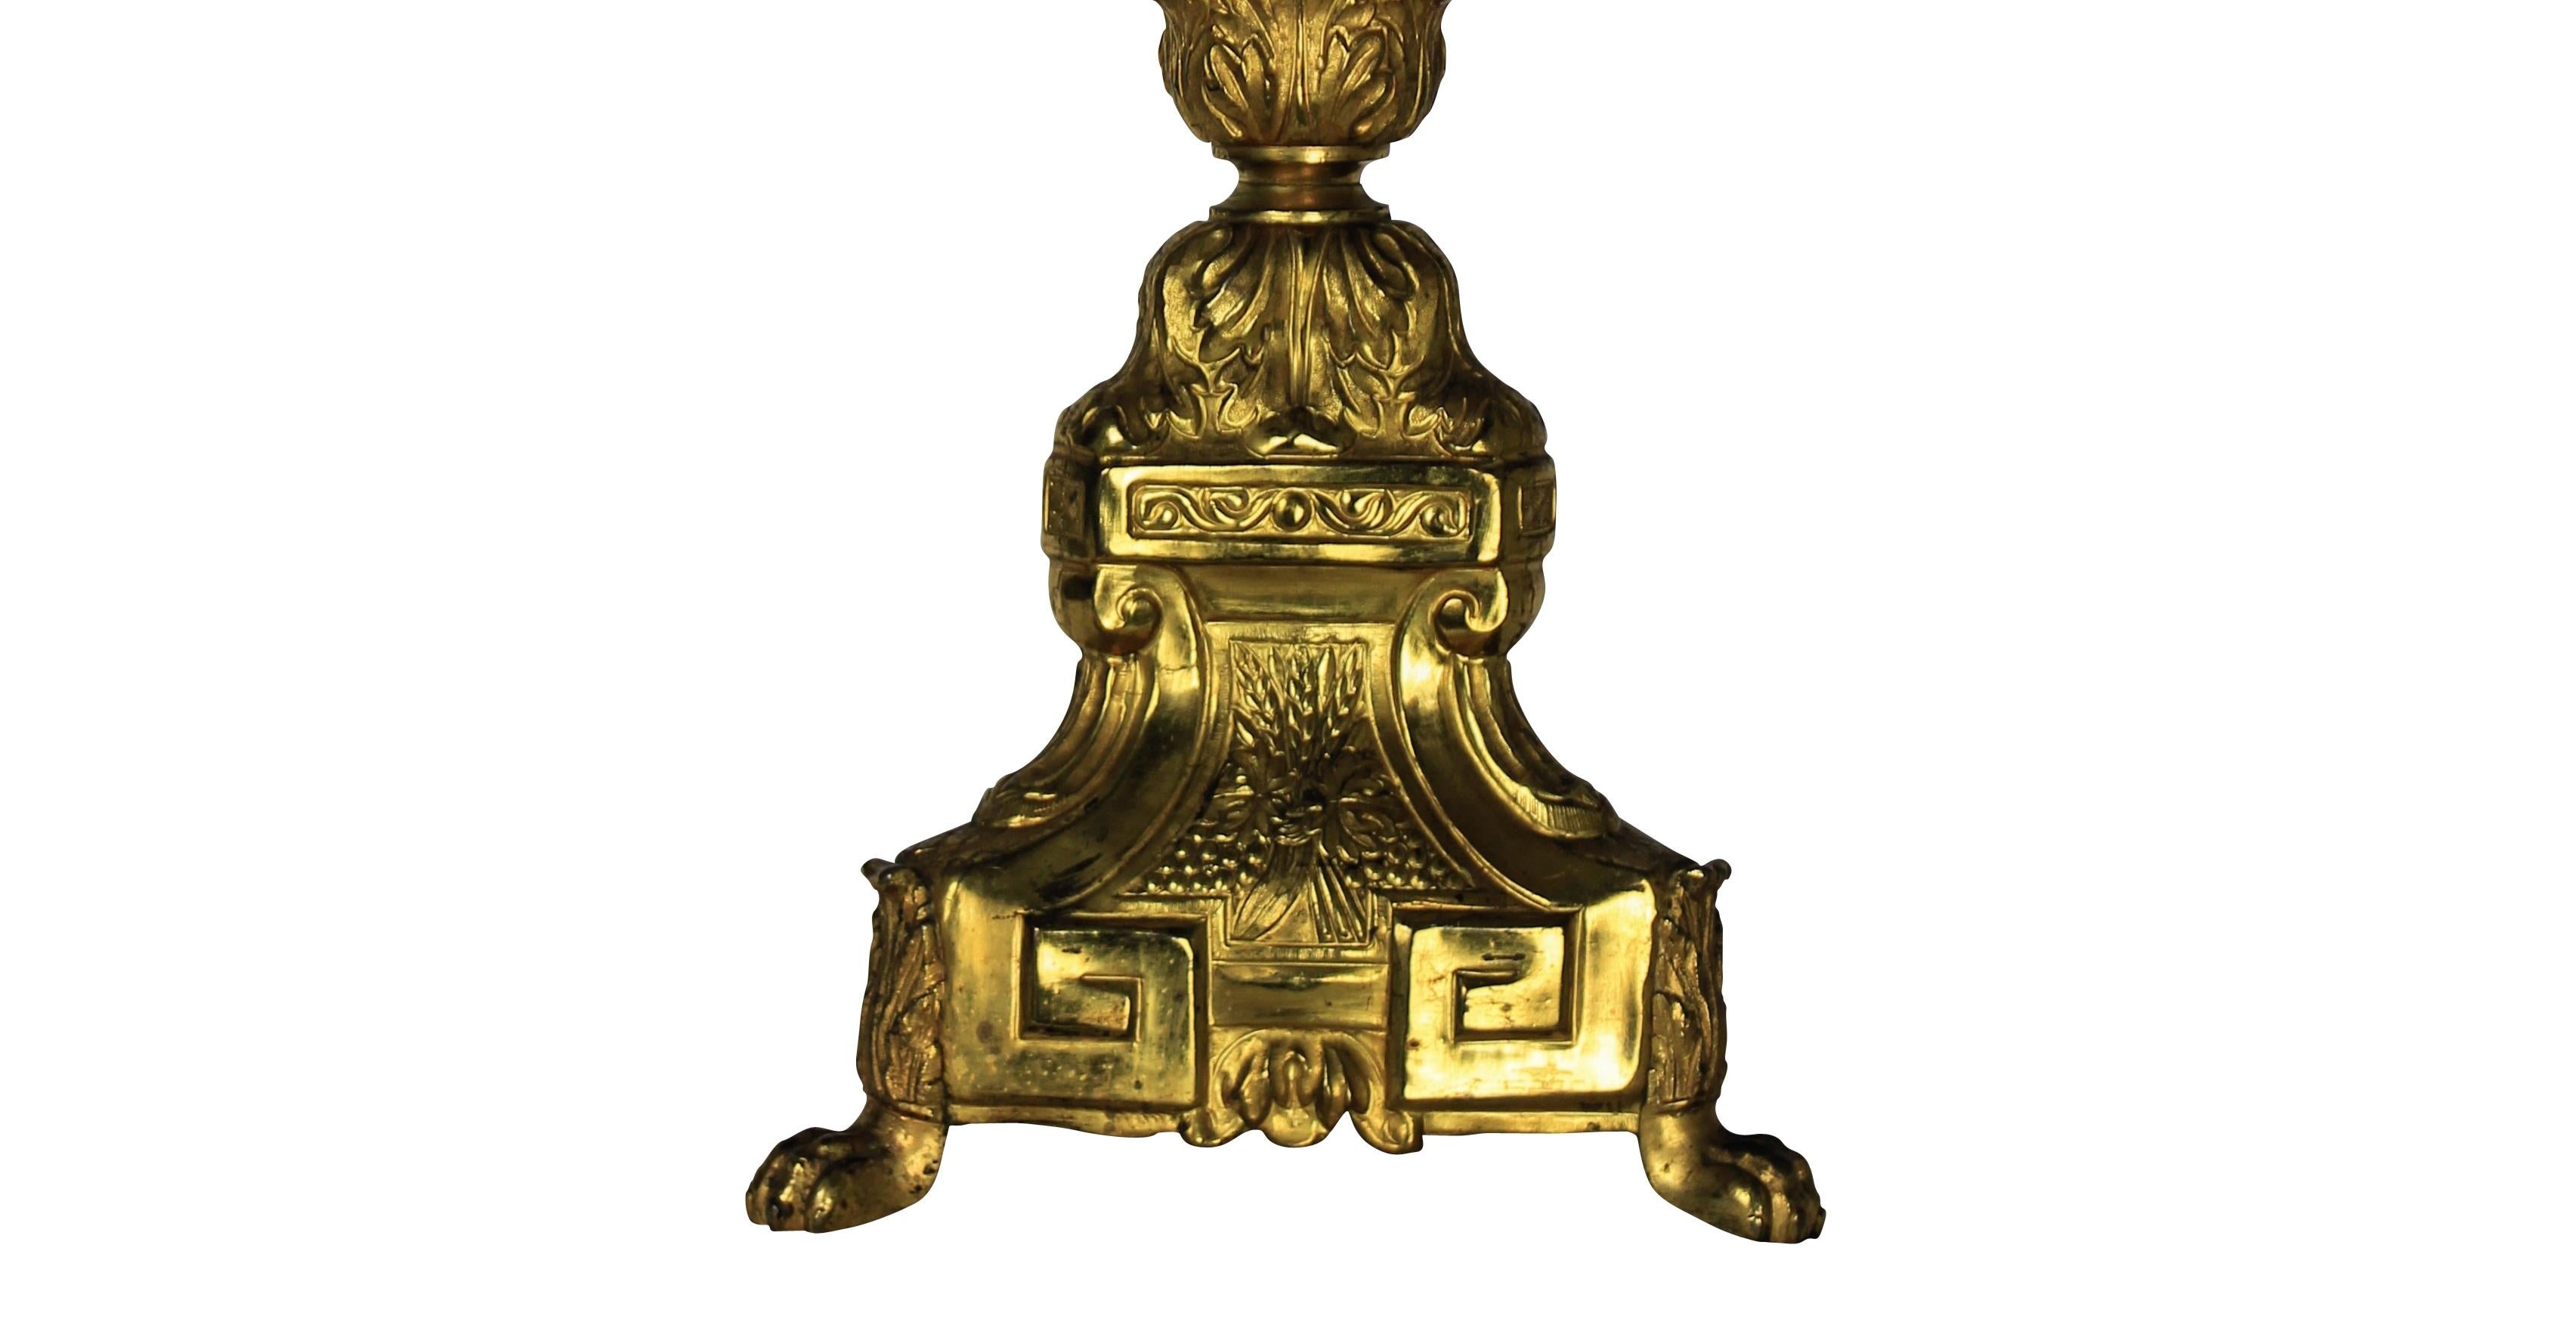 French Gold-Plated Metal Altarstick, circa 1860s (Messing)